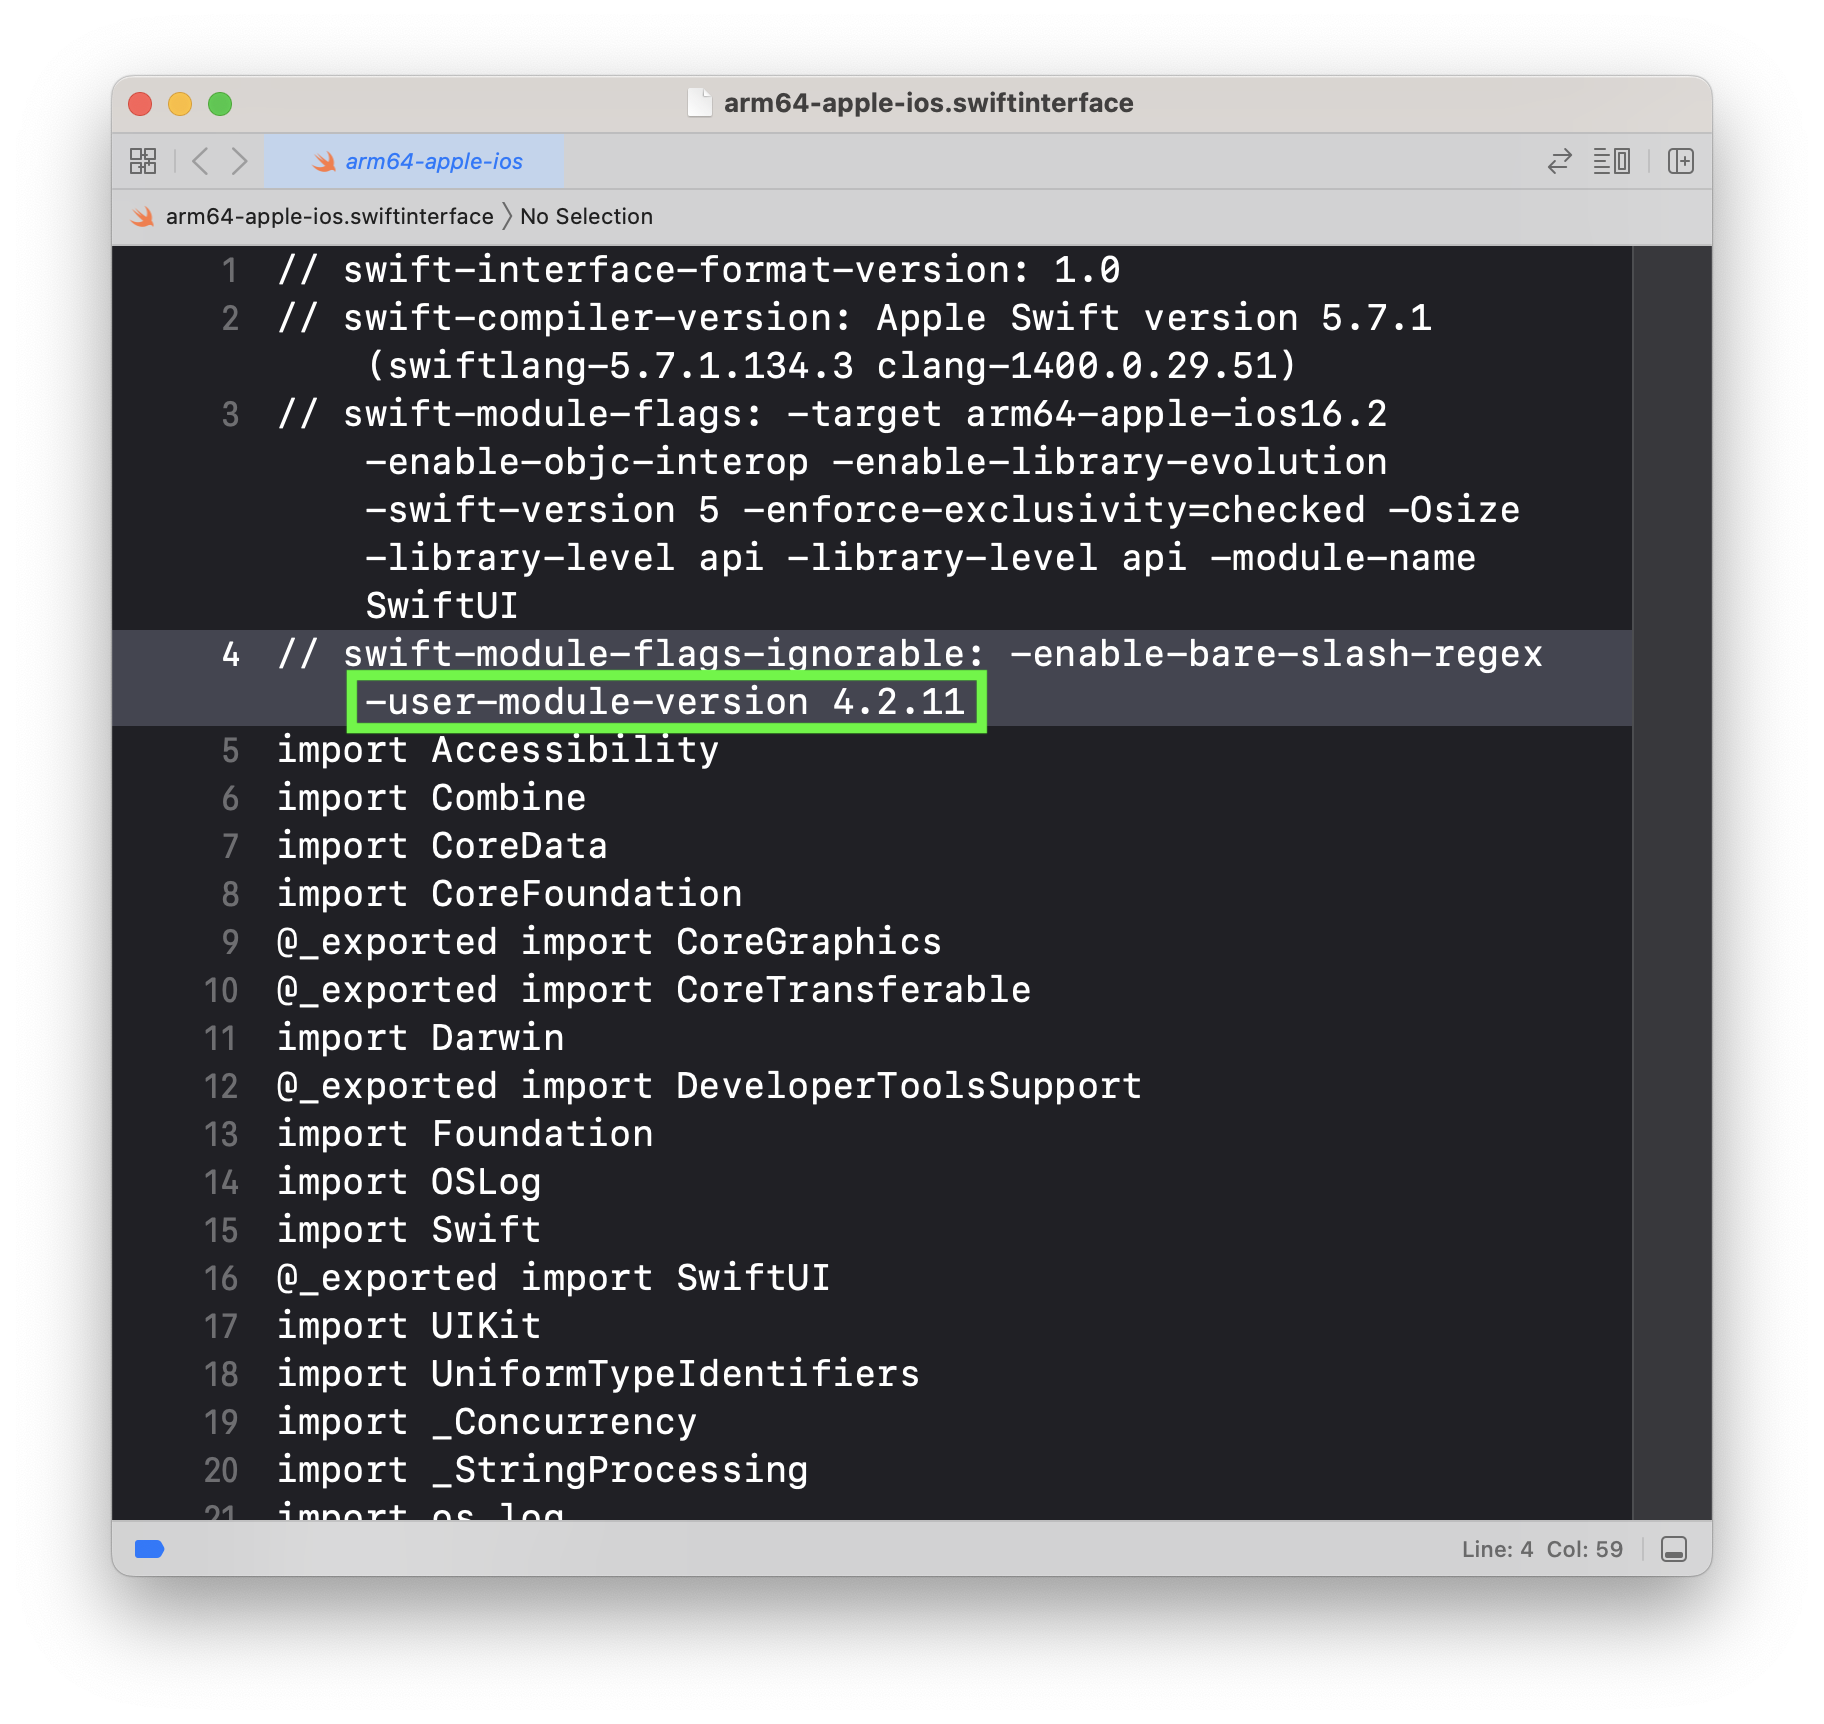 swiftinterface file for SwiftUI shipped in iOS SDK 16.2